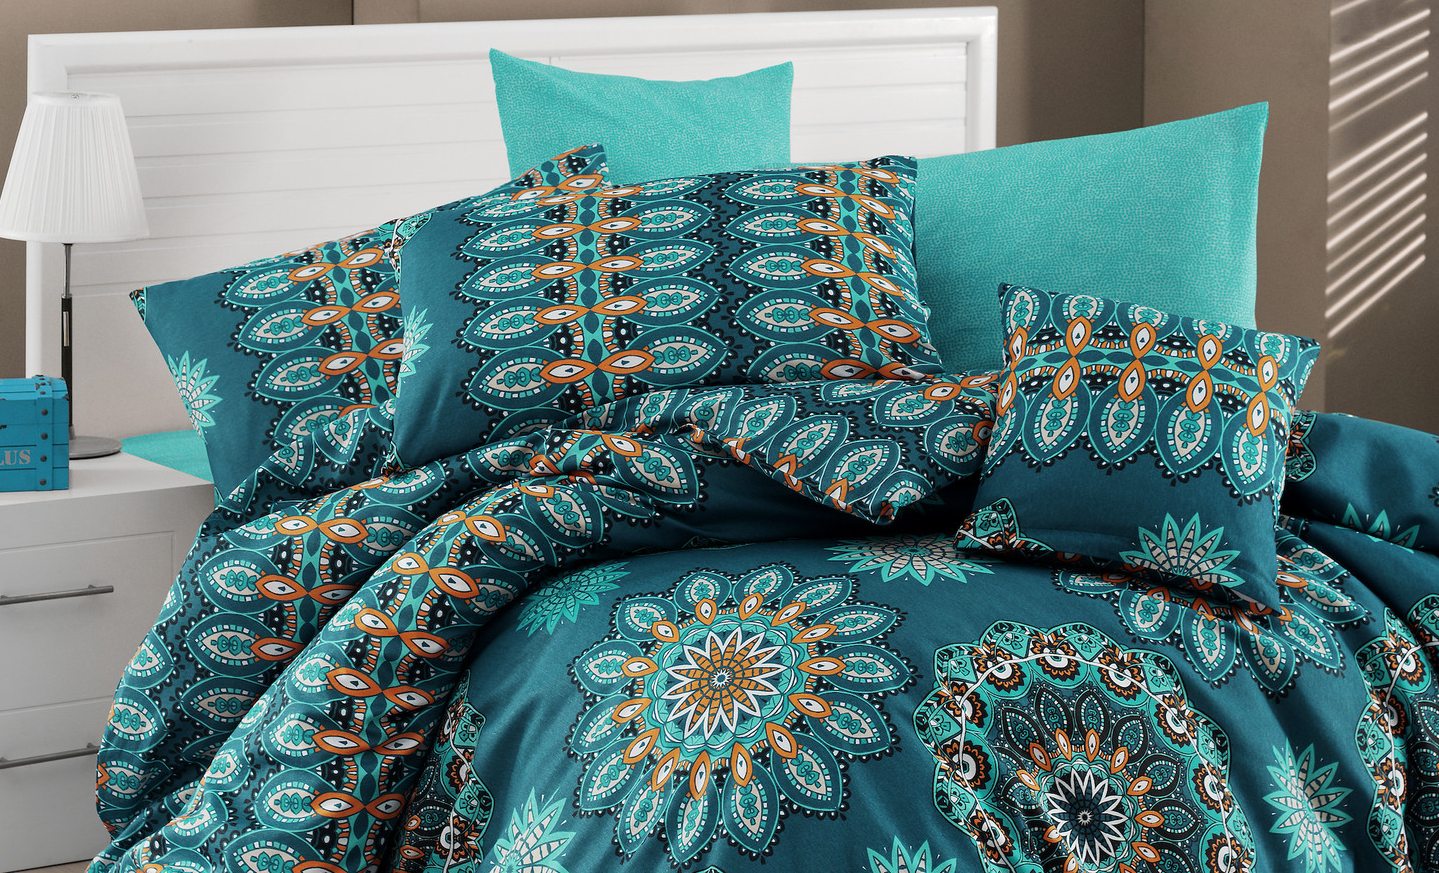 Double Quilt Bedding Set, Black And Turquoise Duvet Cover